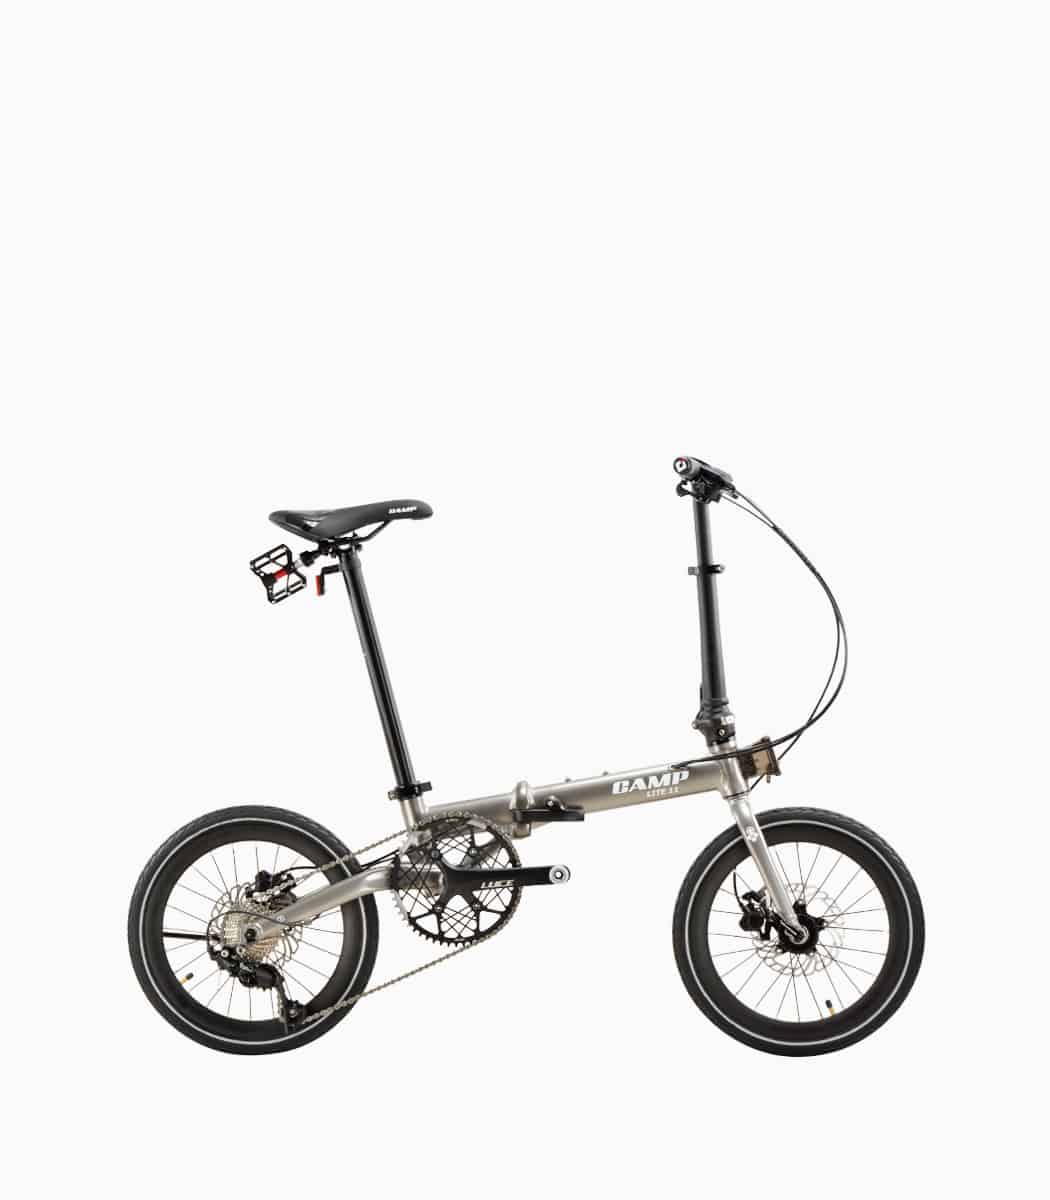 CAMP Lite 11 (TITANIUM SILVER) foldable bicycle with reflective tyres right